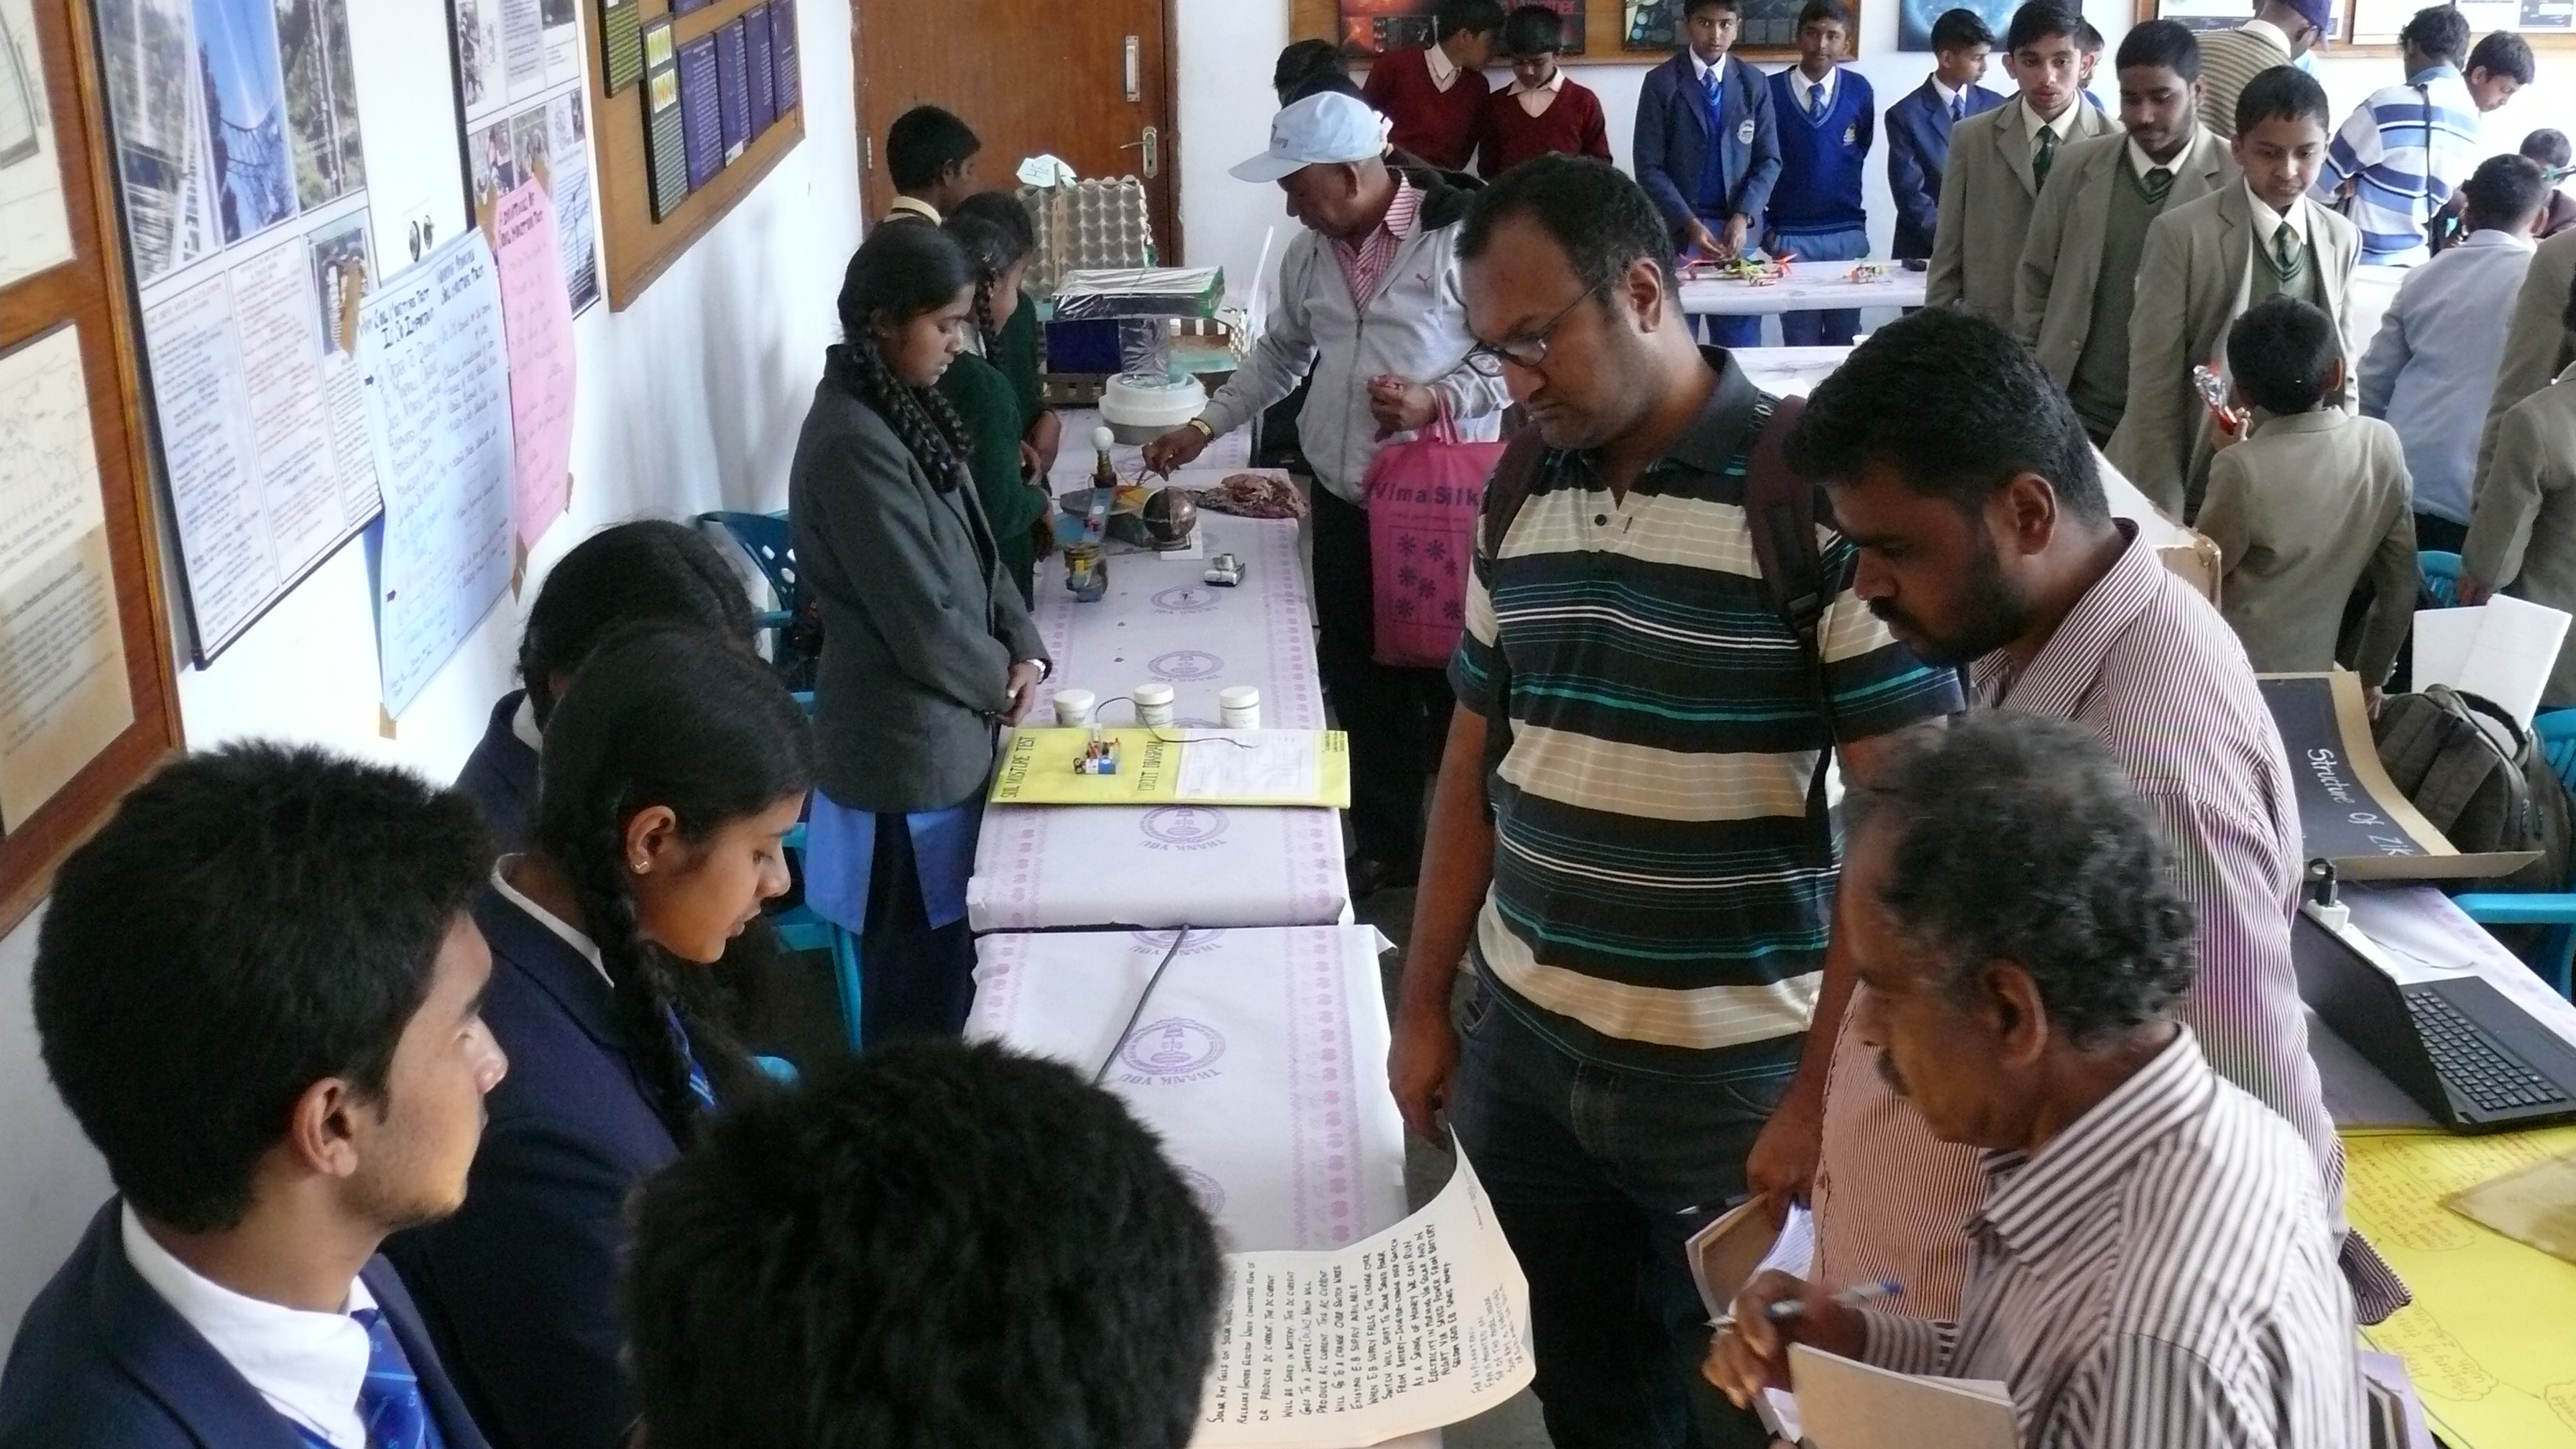 National Science Day - 2016